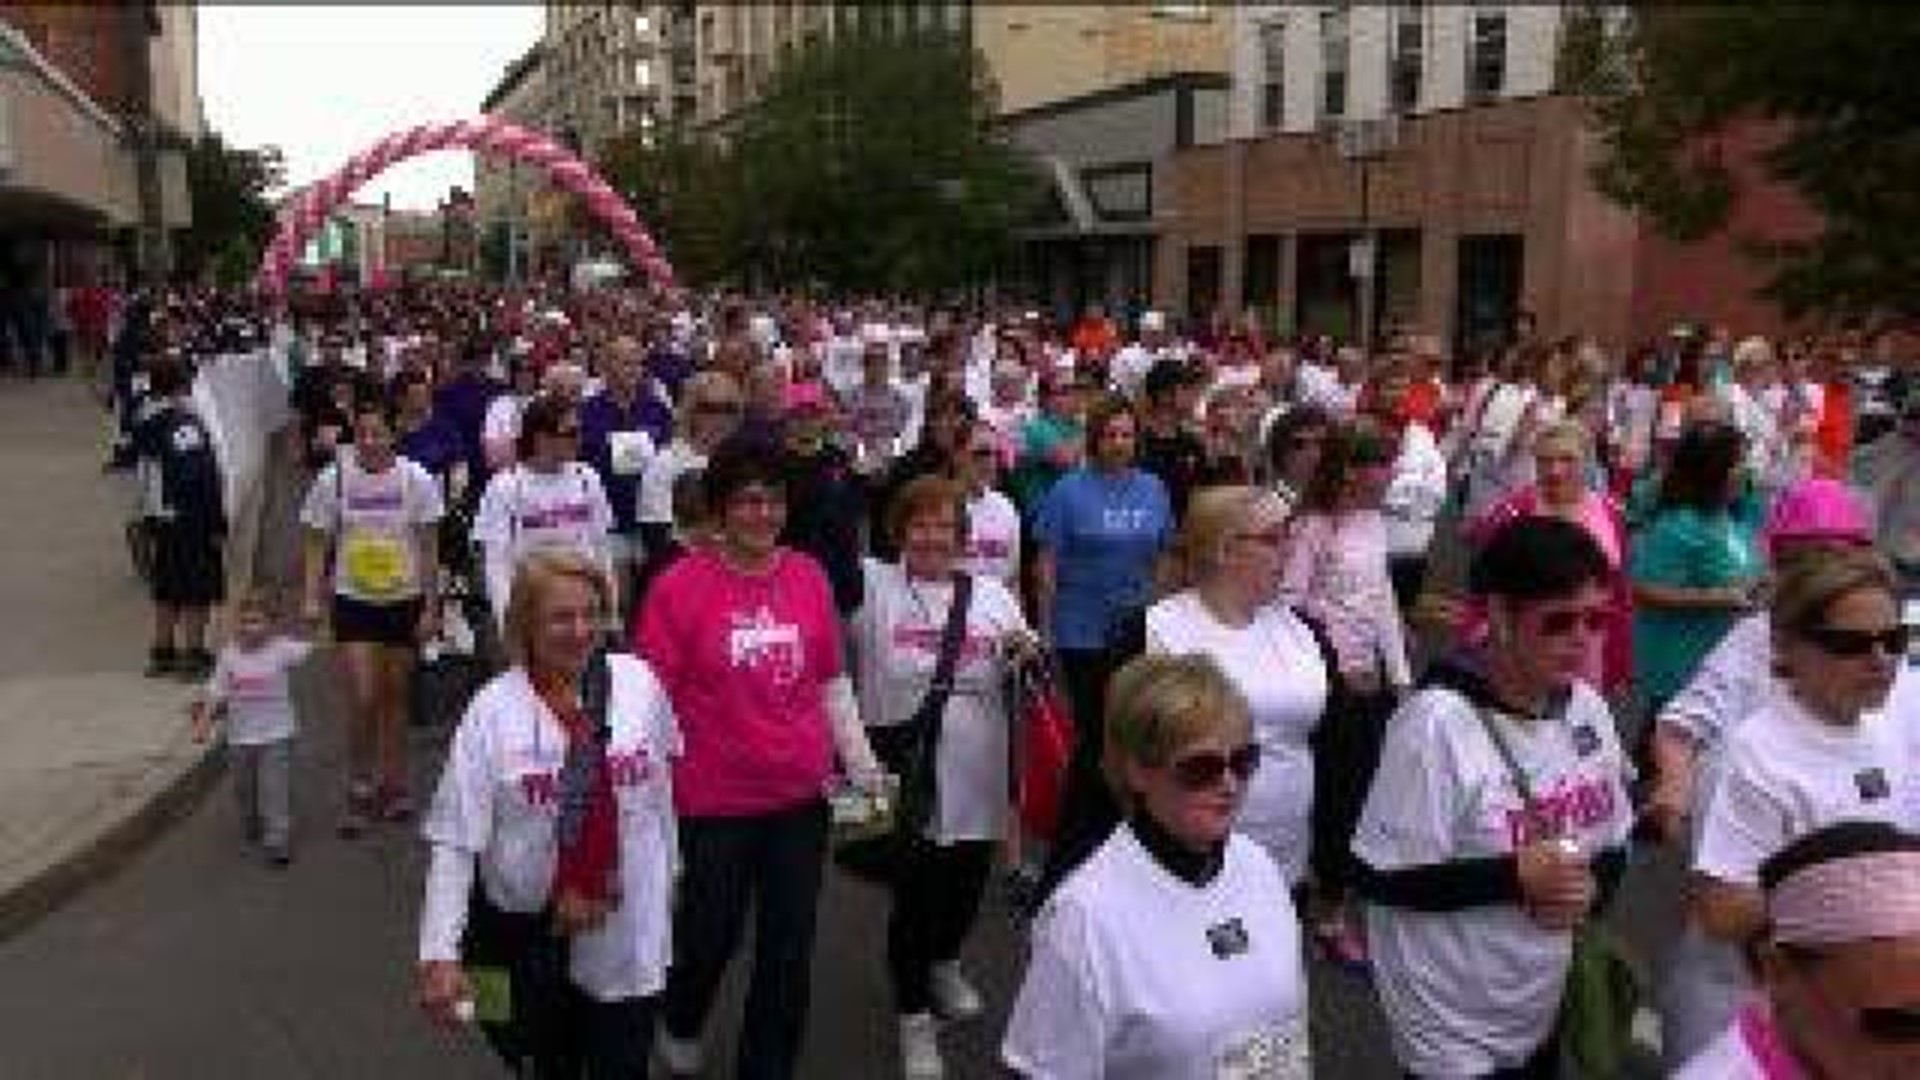 Race for the Cure: Helping to Fight Breast Cancer